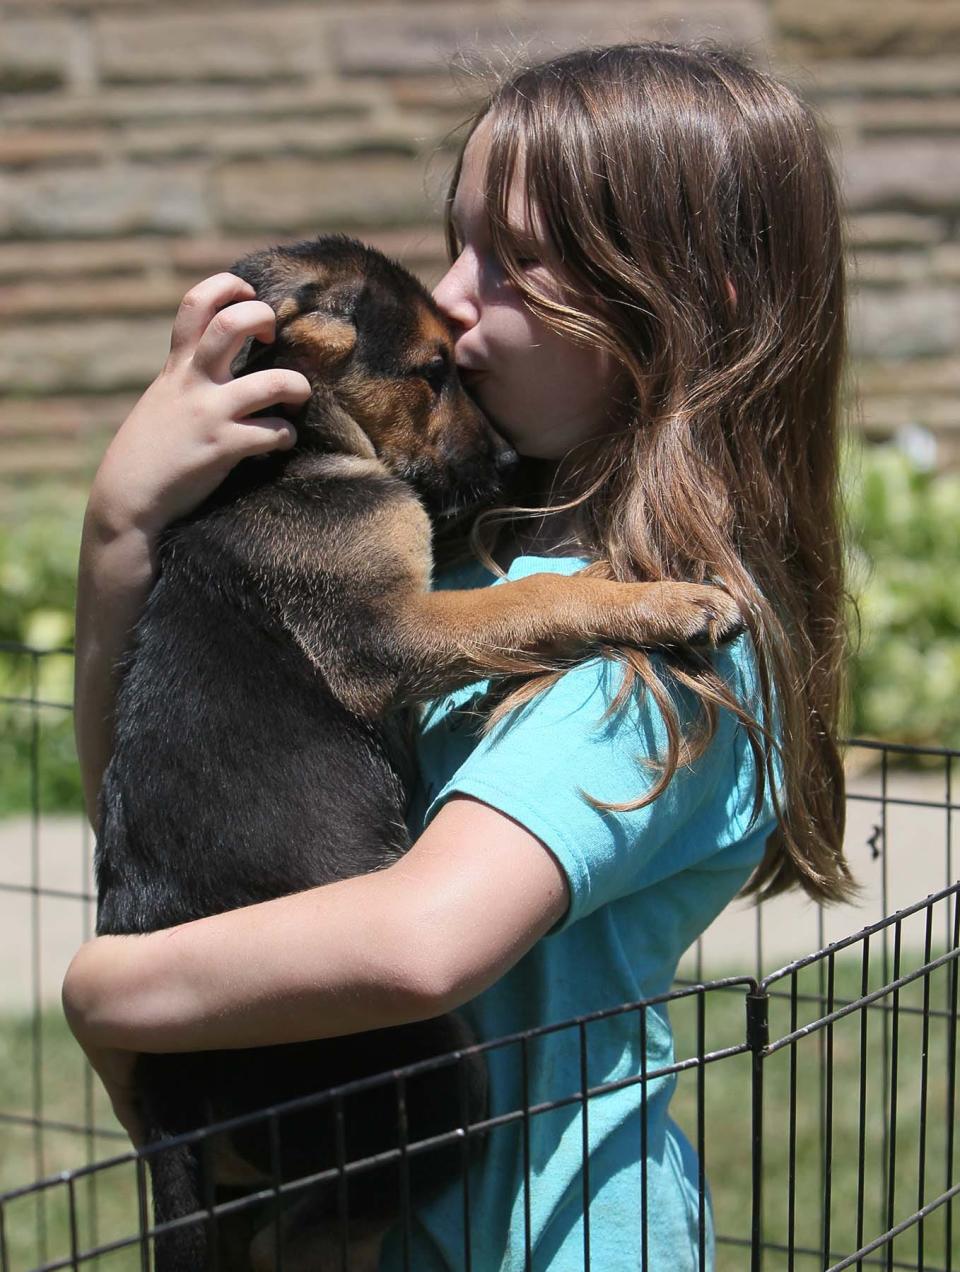 Isabel Buck, 9, gives a smooch to one of thepuppies of her dog Crystal, at her home in New Franklin. The puppies, five females and five males, will be available for adoption through Paws and Prayers Rescue.